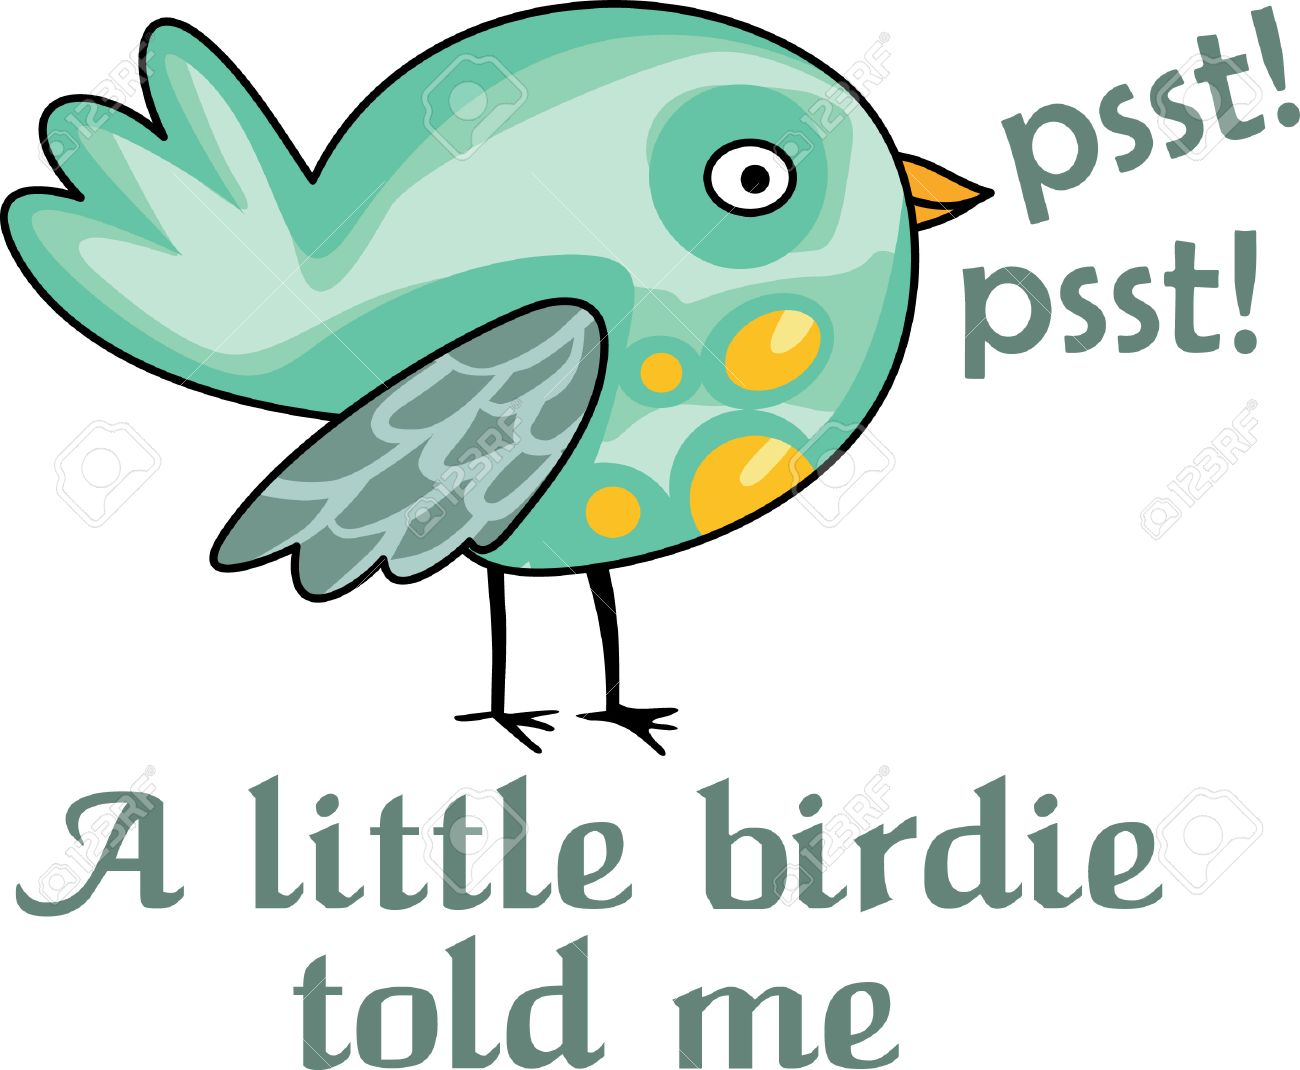 44988308-Psst-Psst-A-little-birdie-told-me-that-someone-special-wants-this-image--Stock-Vector.jpg